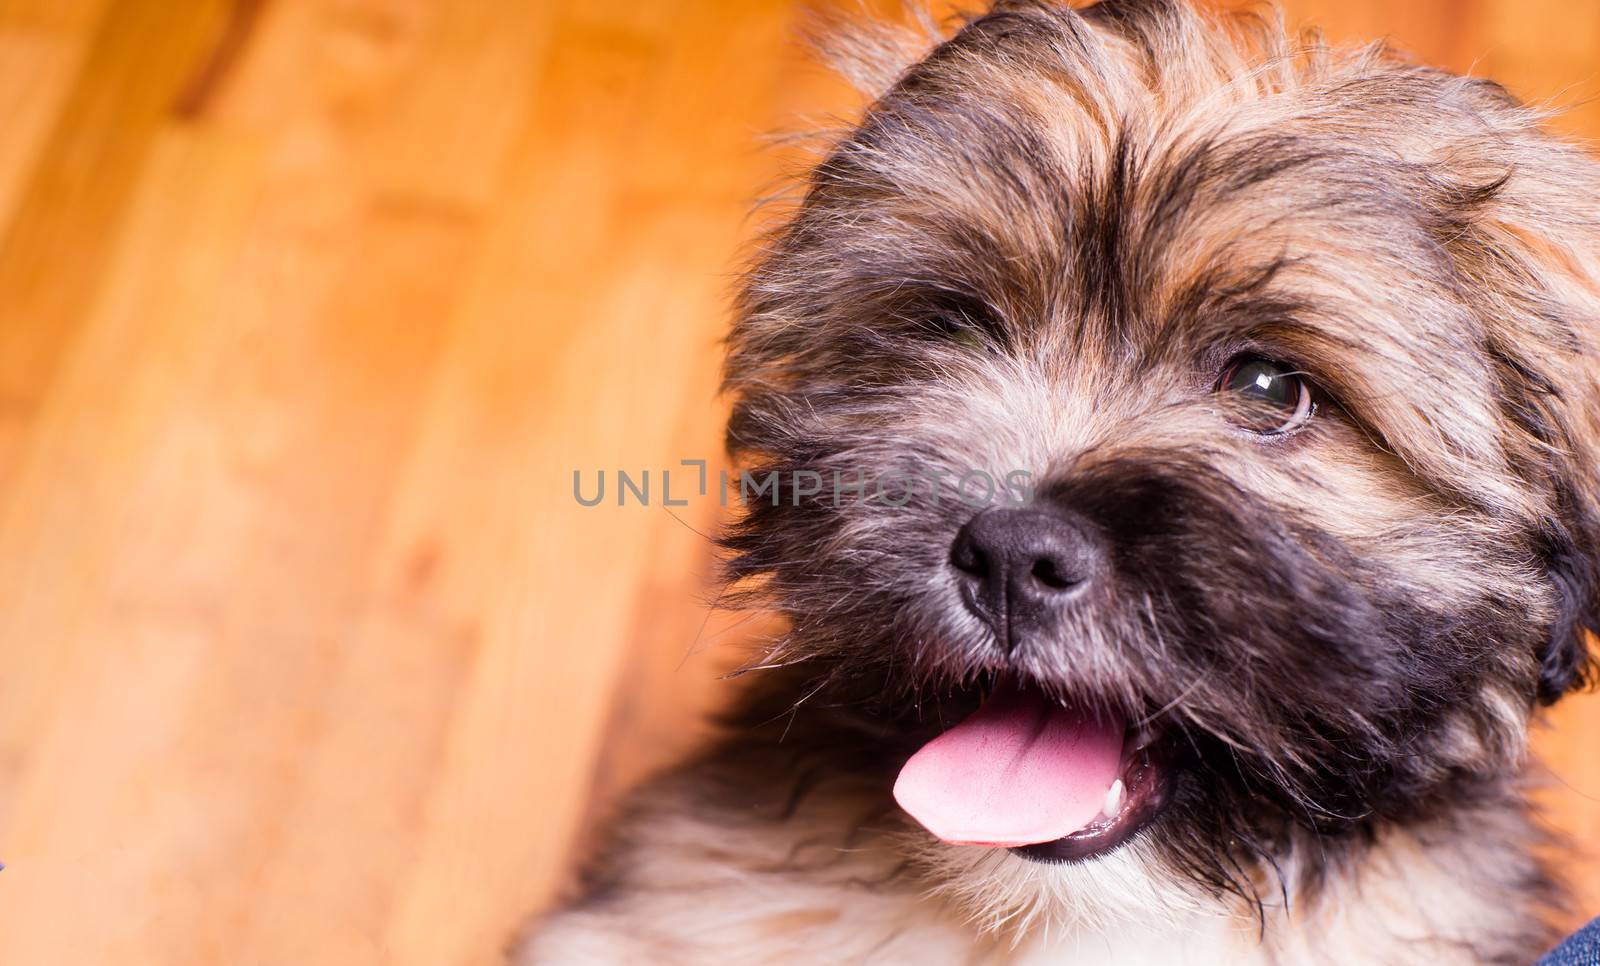 Tibetan Lhasa Apso Small Canine Dog Breed Furry Animal Creature by ChrisBoswell